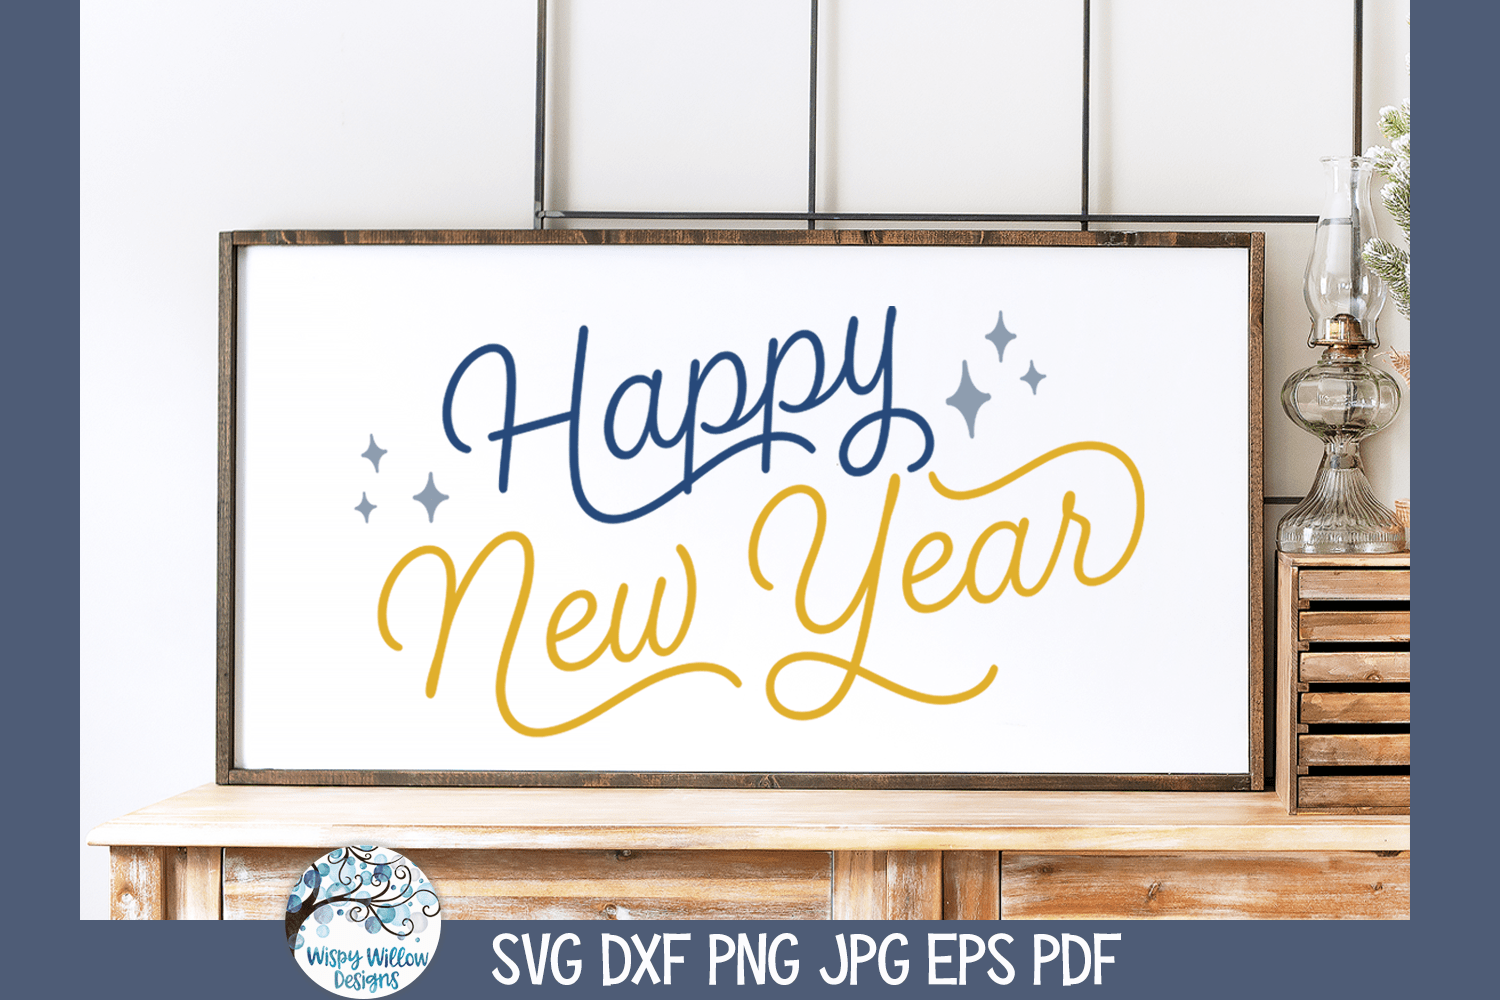 Happy New Year SVG | New Years SVG Design Wispy Willow Designs Company